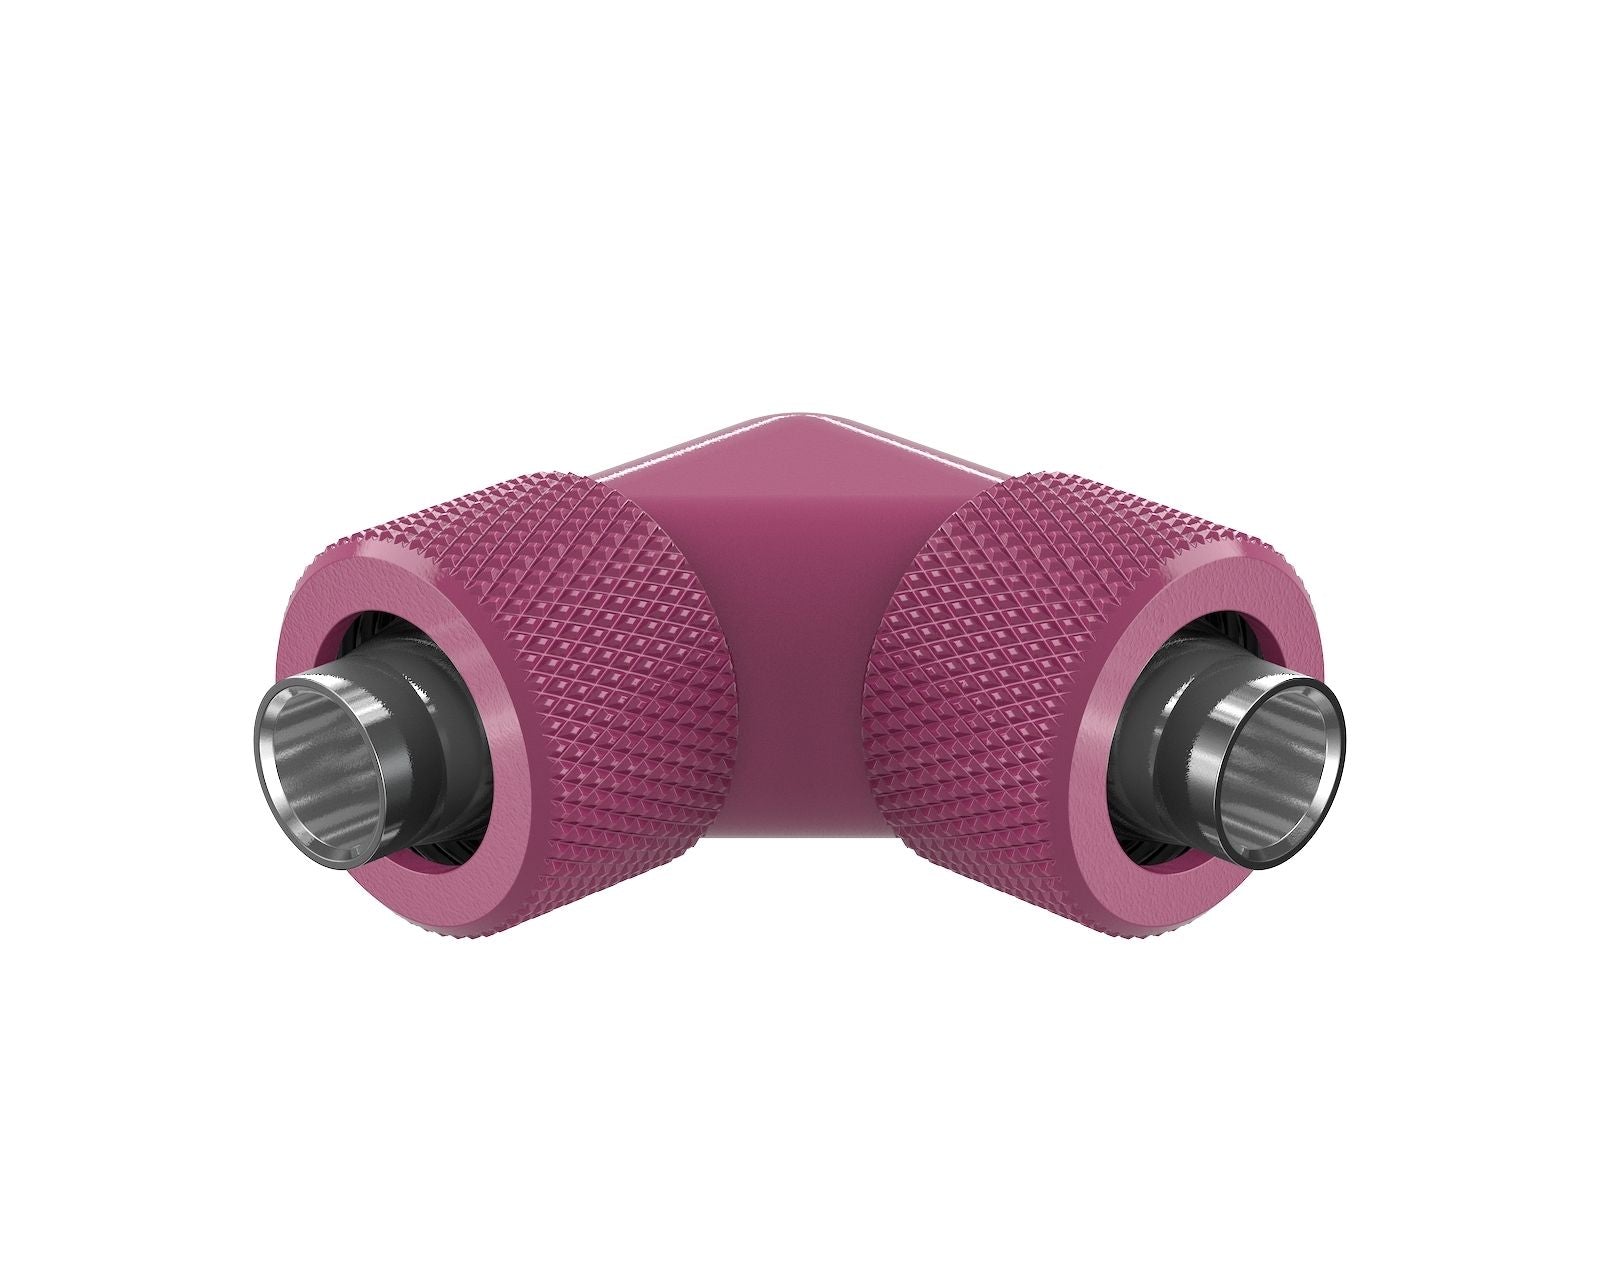 PrimoChill SecureFit SX - Premium 90 Degree Compression Fitting Set For 3/8in ID x 1/2in OD Flexible Tubing (F-SFSX1290) - Available in 20+ Colors, Custom Watercooling Loop Ready - Magenta